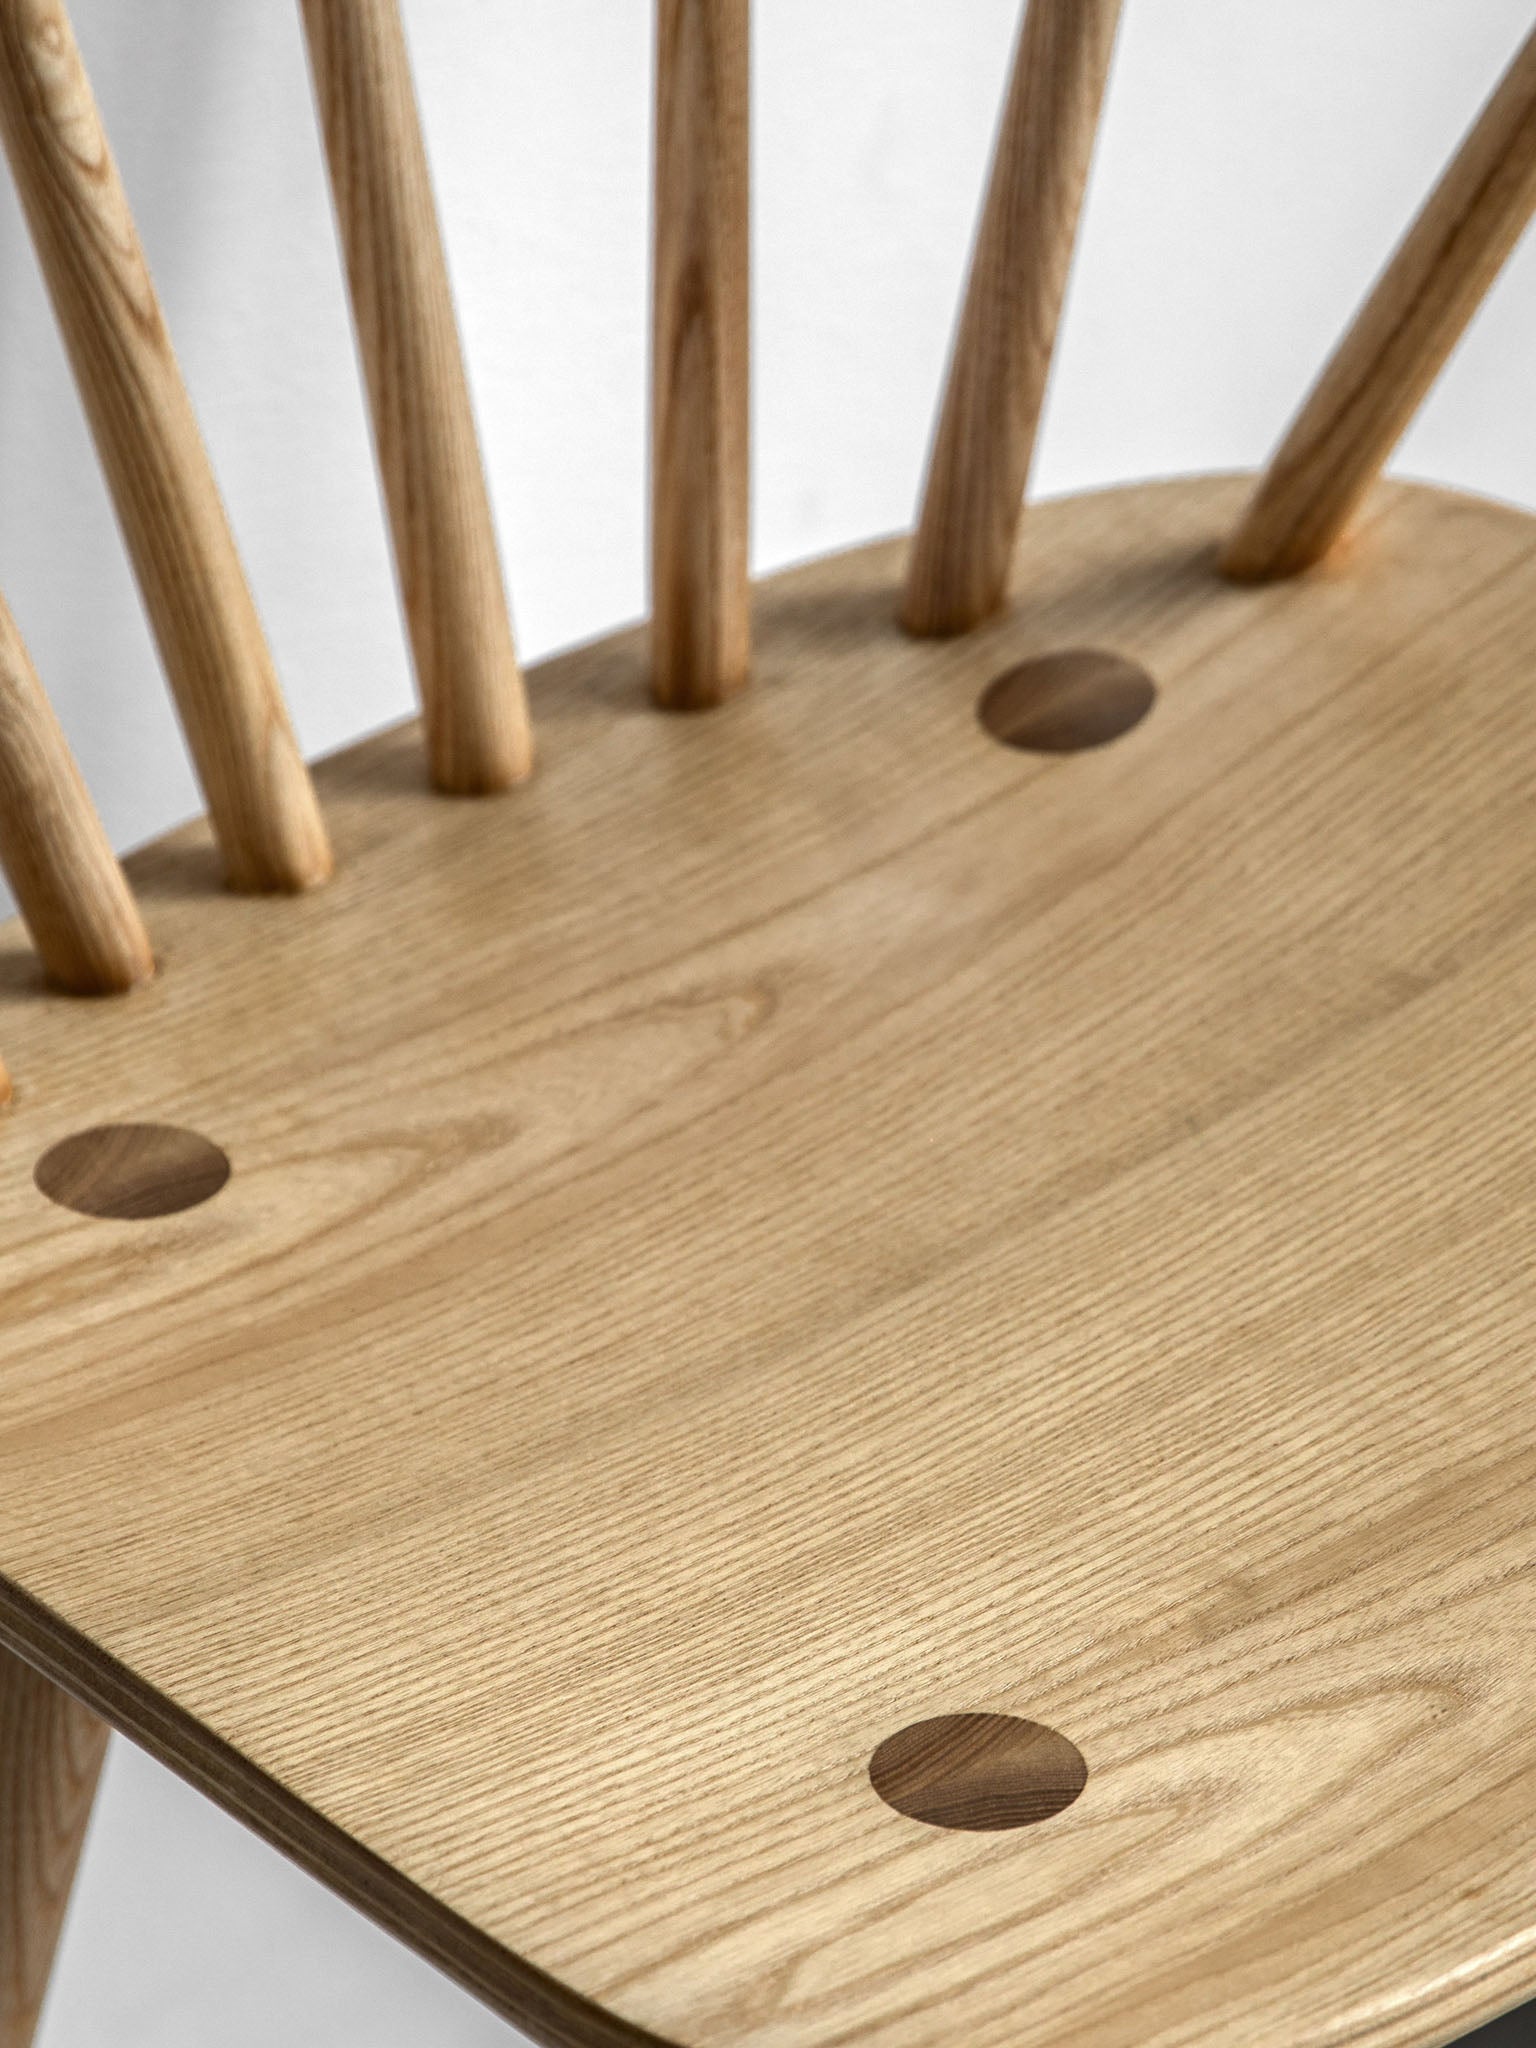 Wooden bar stool with spindles